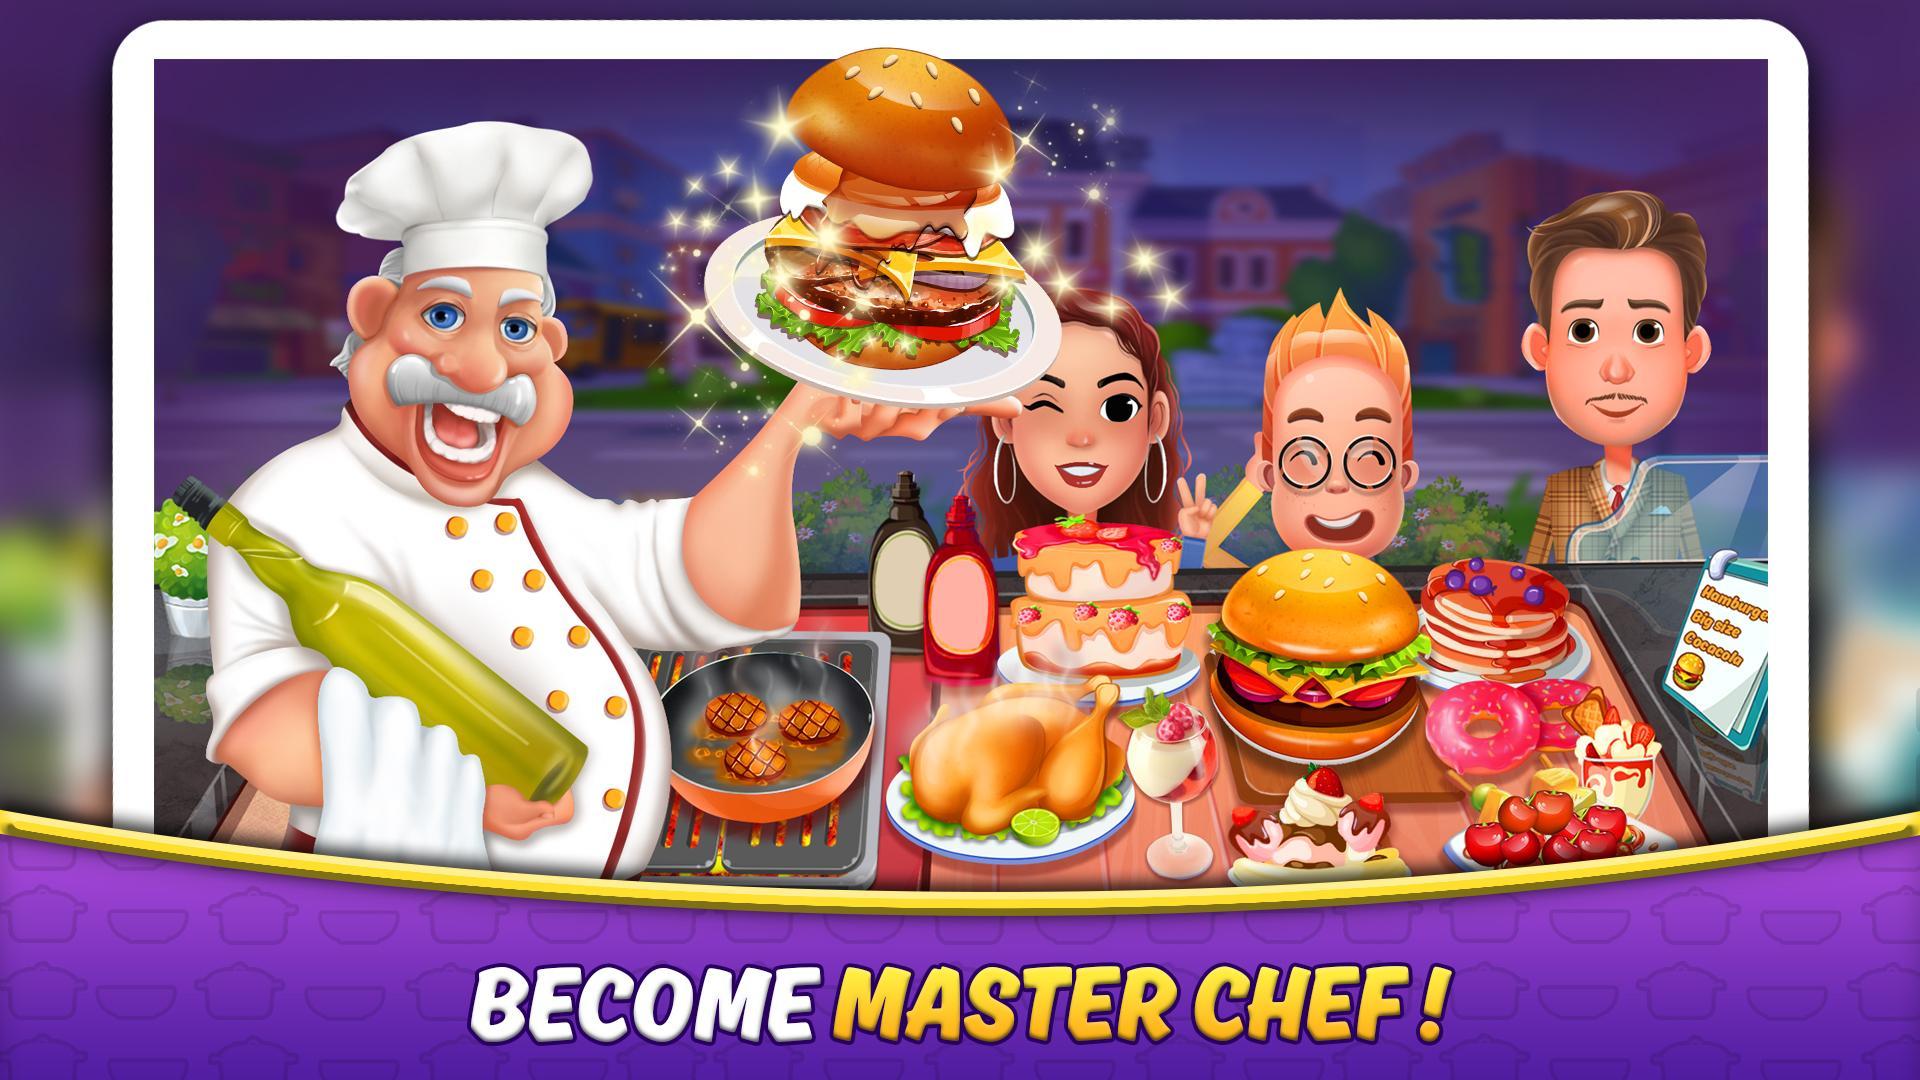 Screenshot 1 of Cooking Chef Fever: Craze for Cooking Game 1.0.13